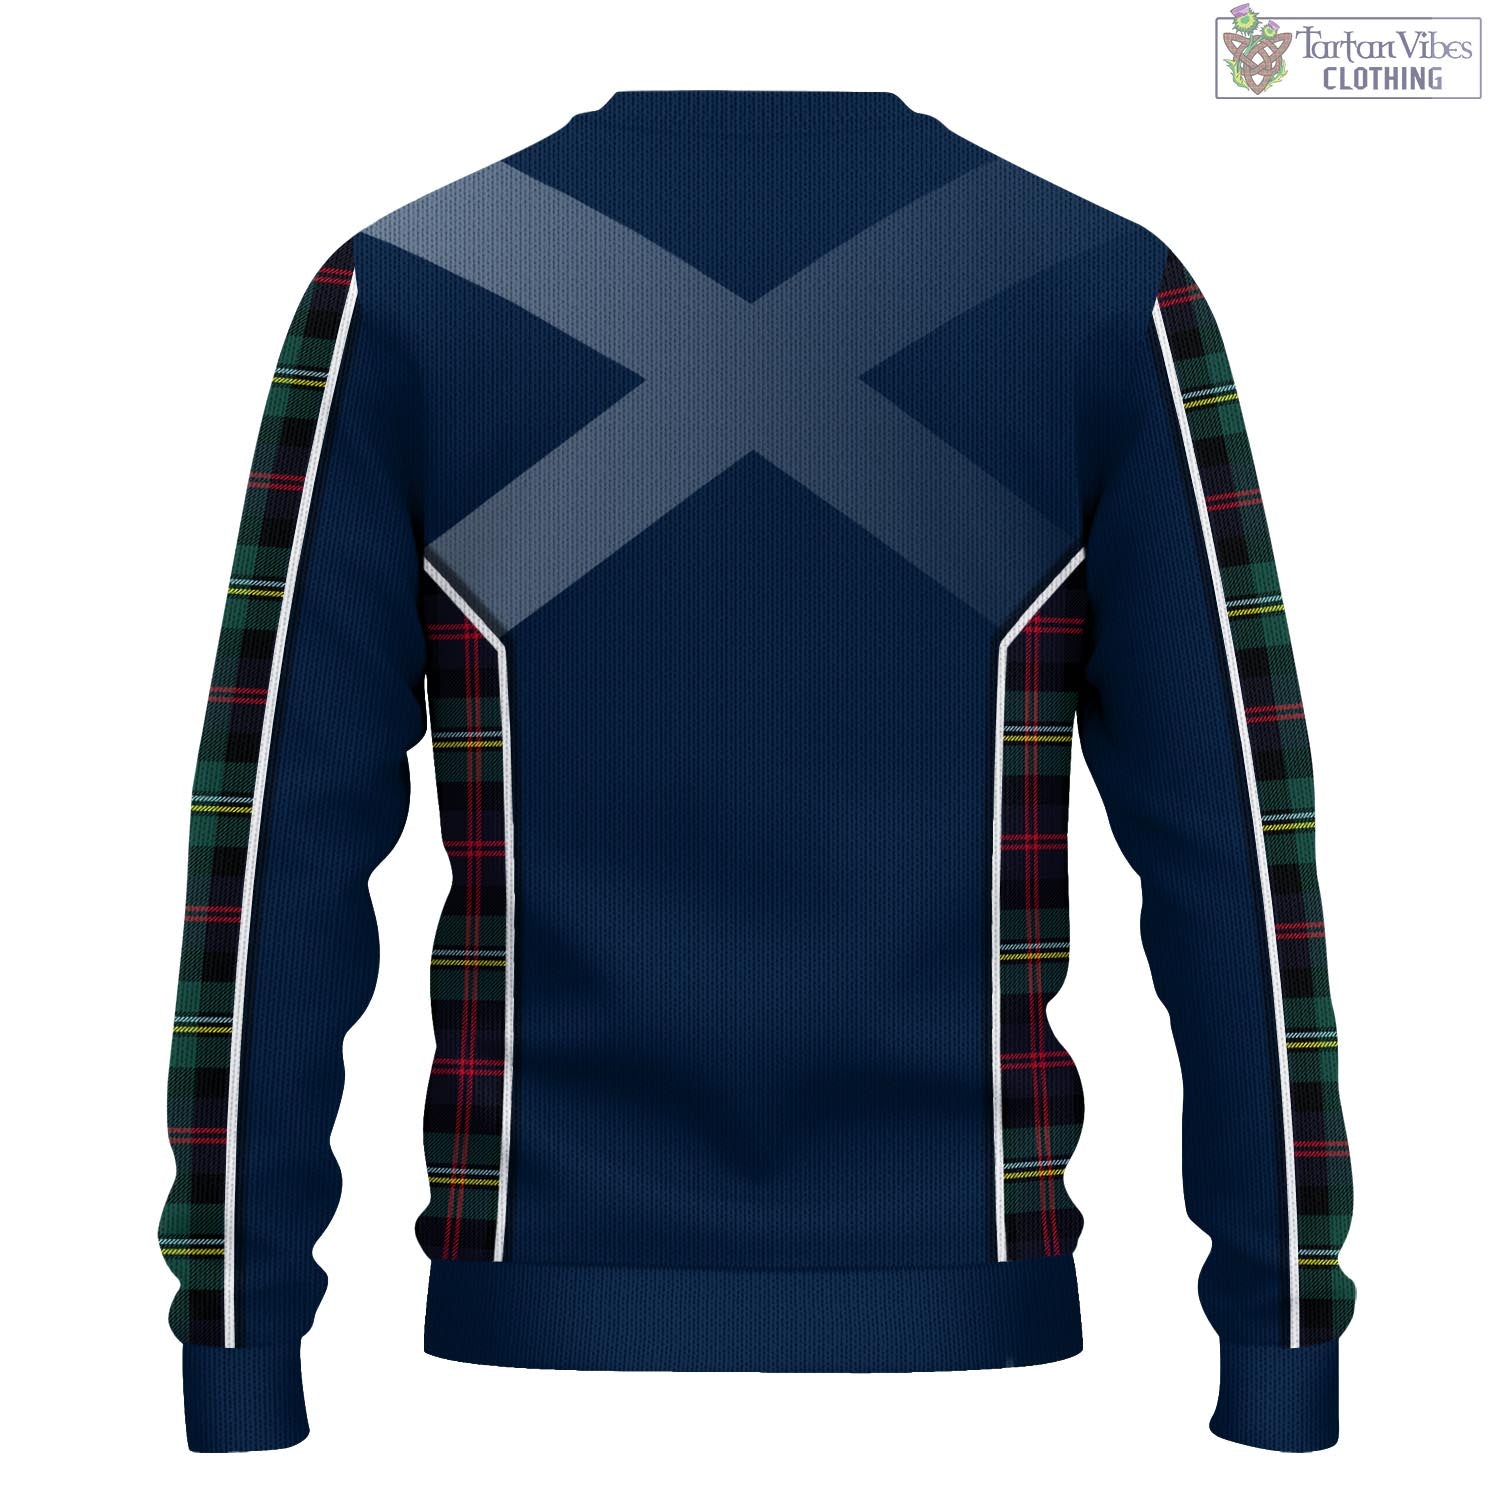 Tartan Vibes Clothing Malcolm Modern Tartan Knitted Sweatshirt with Family Crest and Scottish Thistle Vibes Sport Style